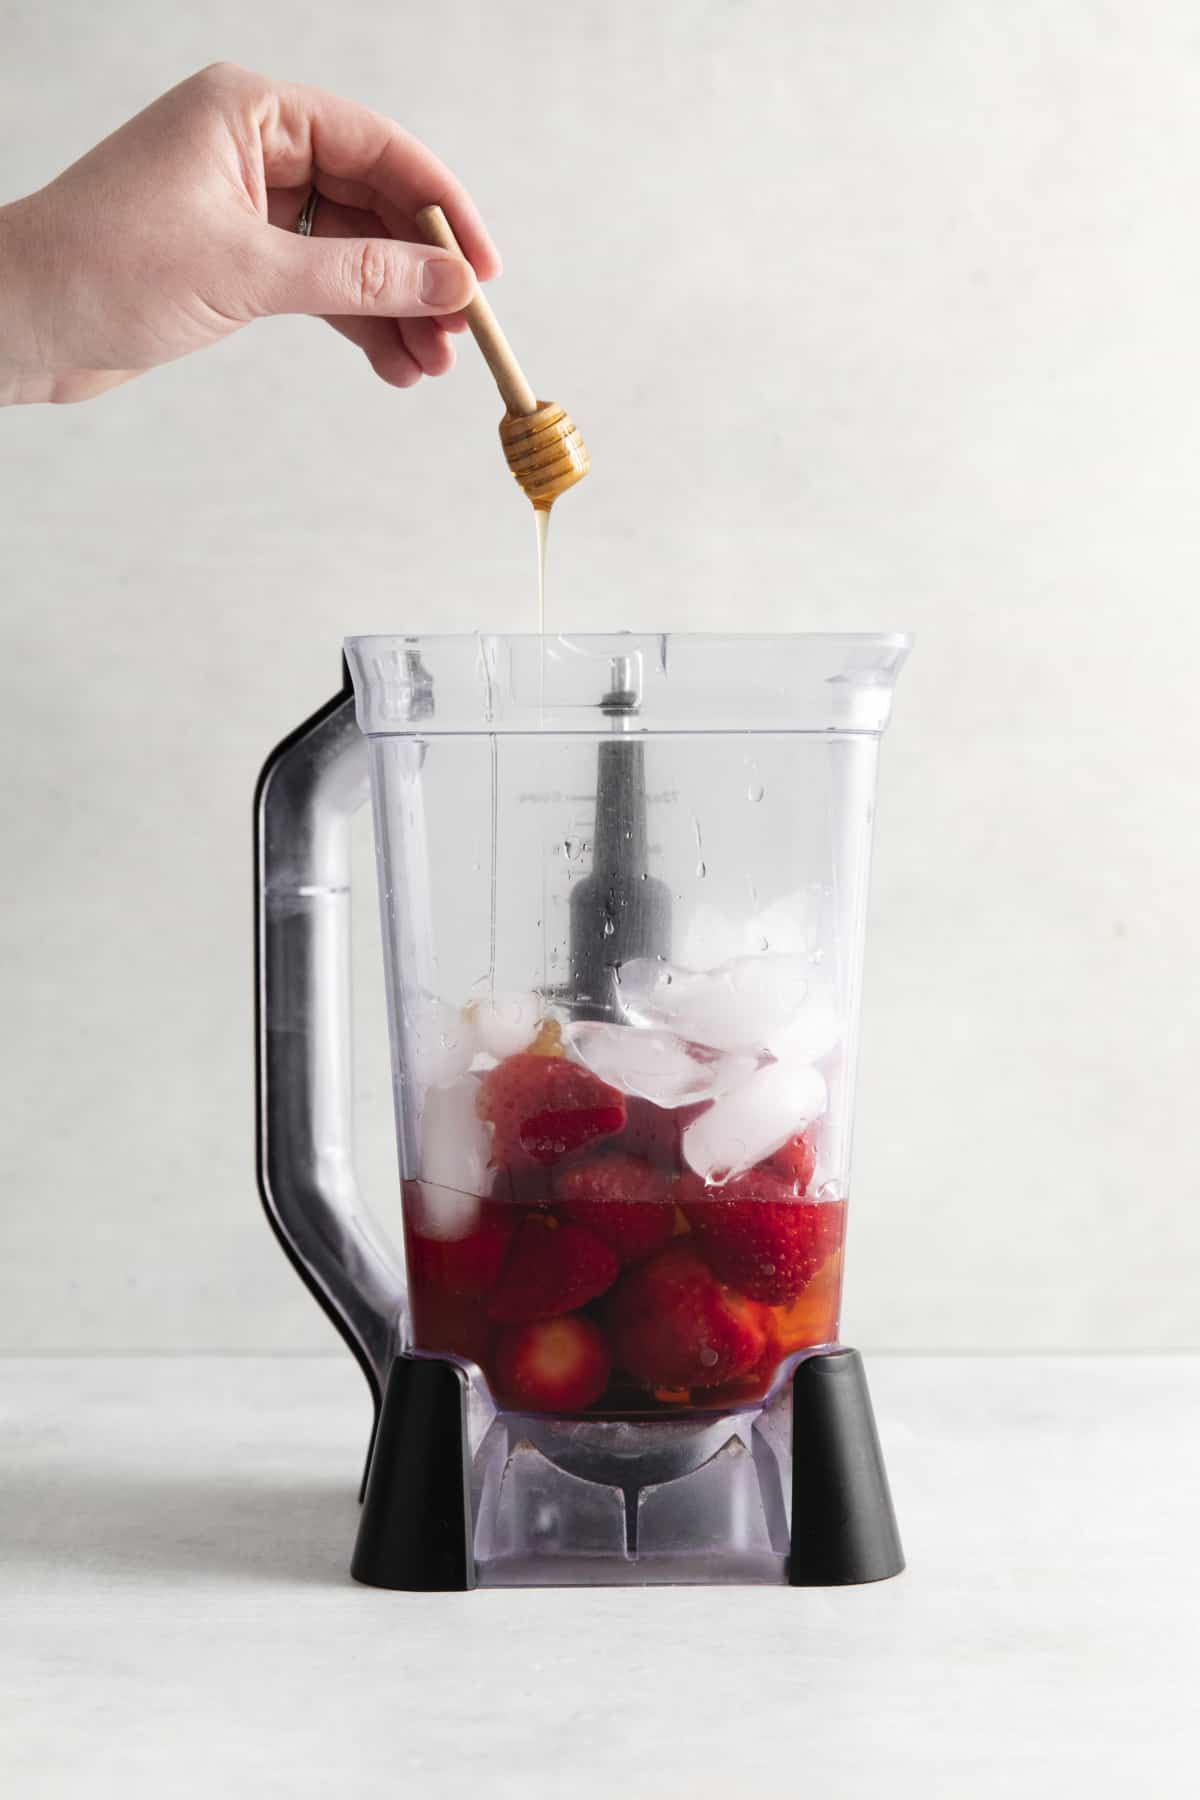 Honey is placed in a blender with strawberries and ice.